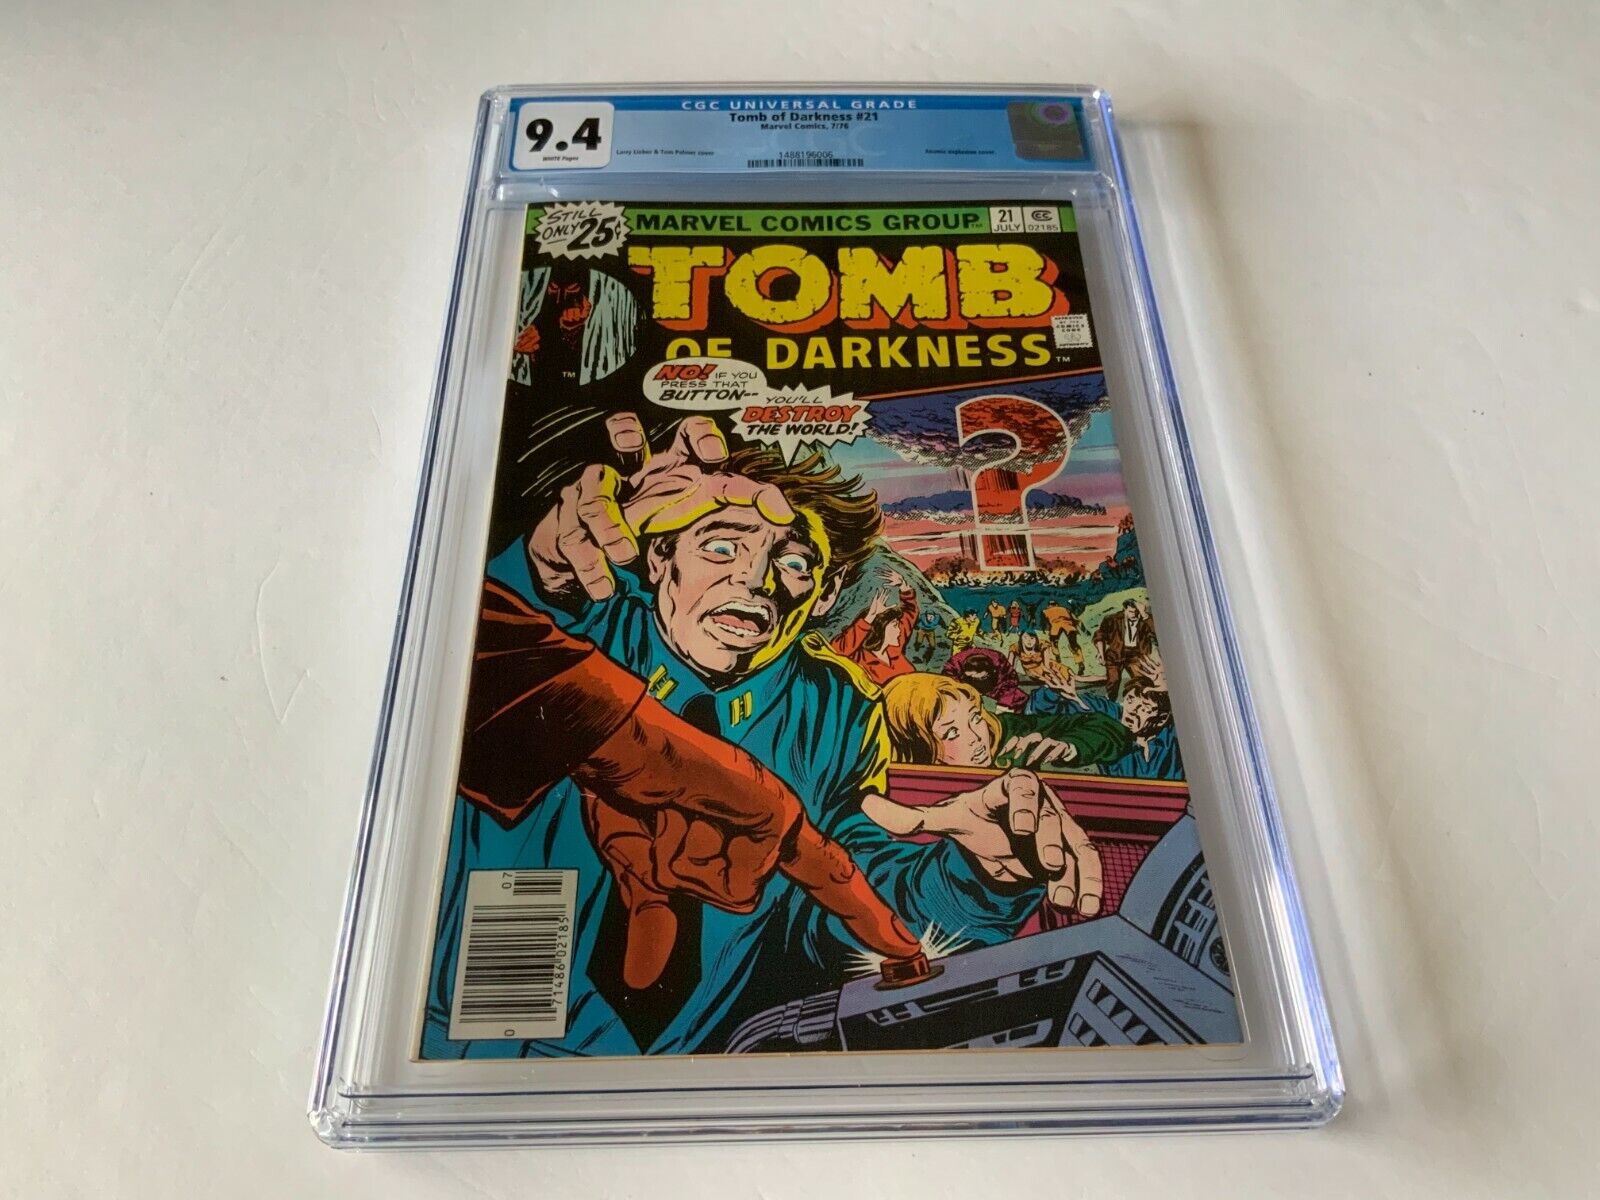 TOMB OF DARKNESS 21 CGC 9.4 WHITE PAGES ATOMIC EXPLOSION CVR MARVEL COMICS 1976